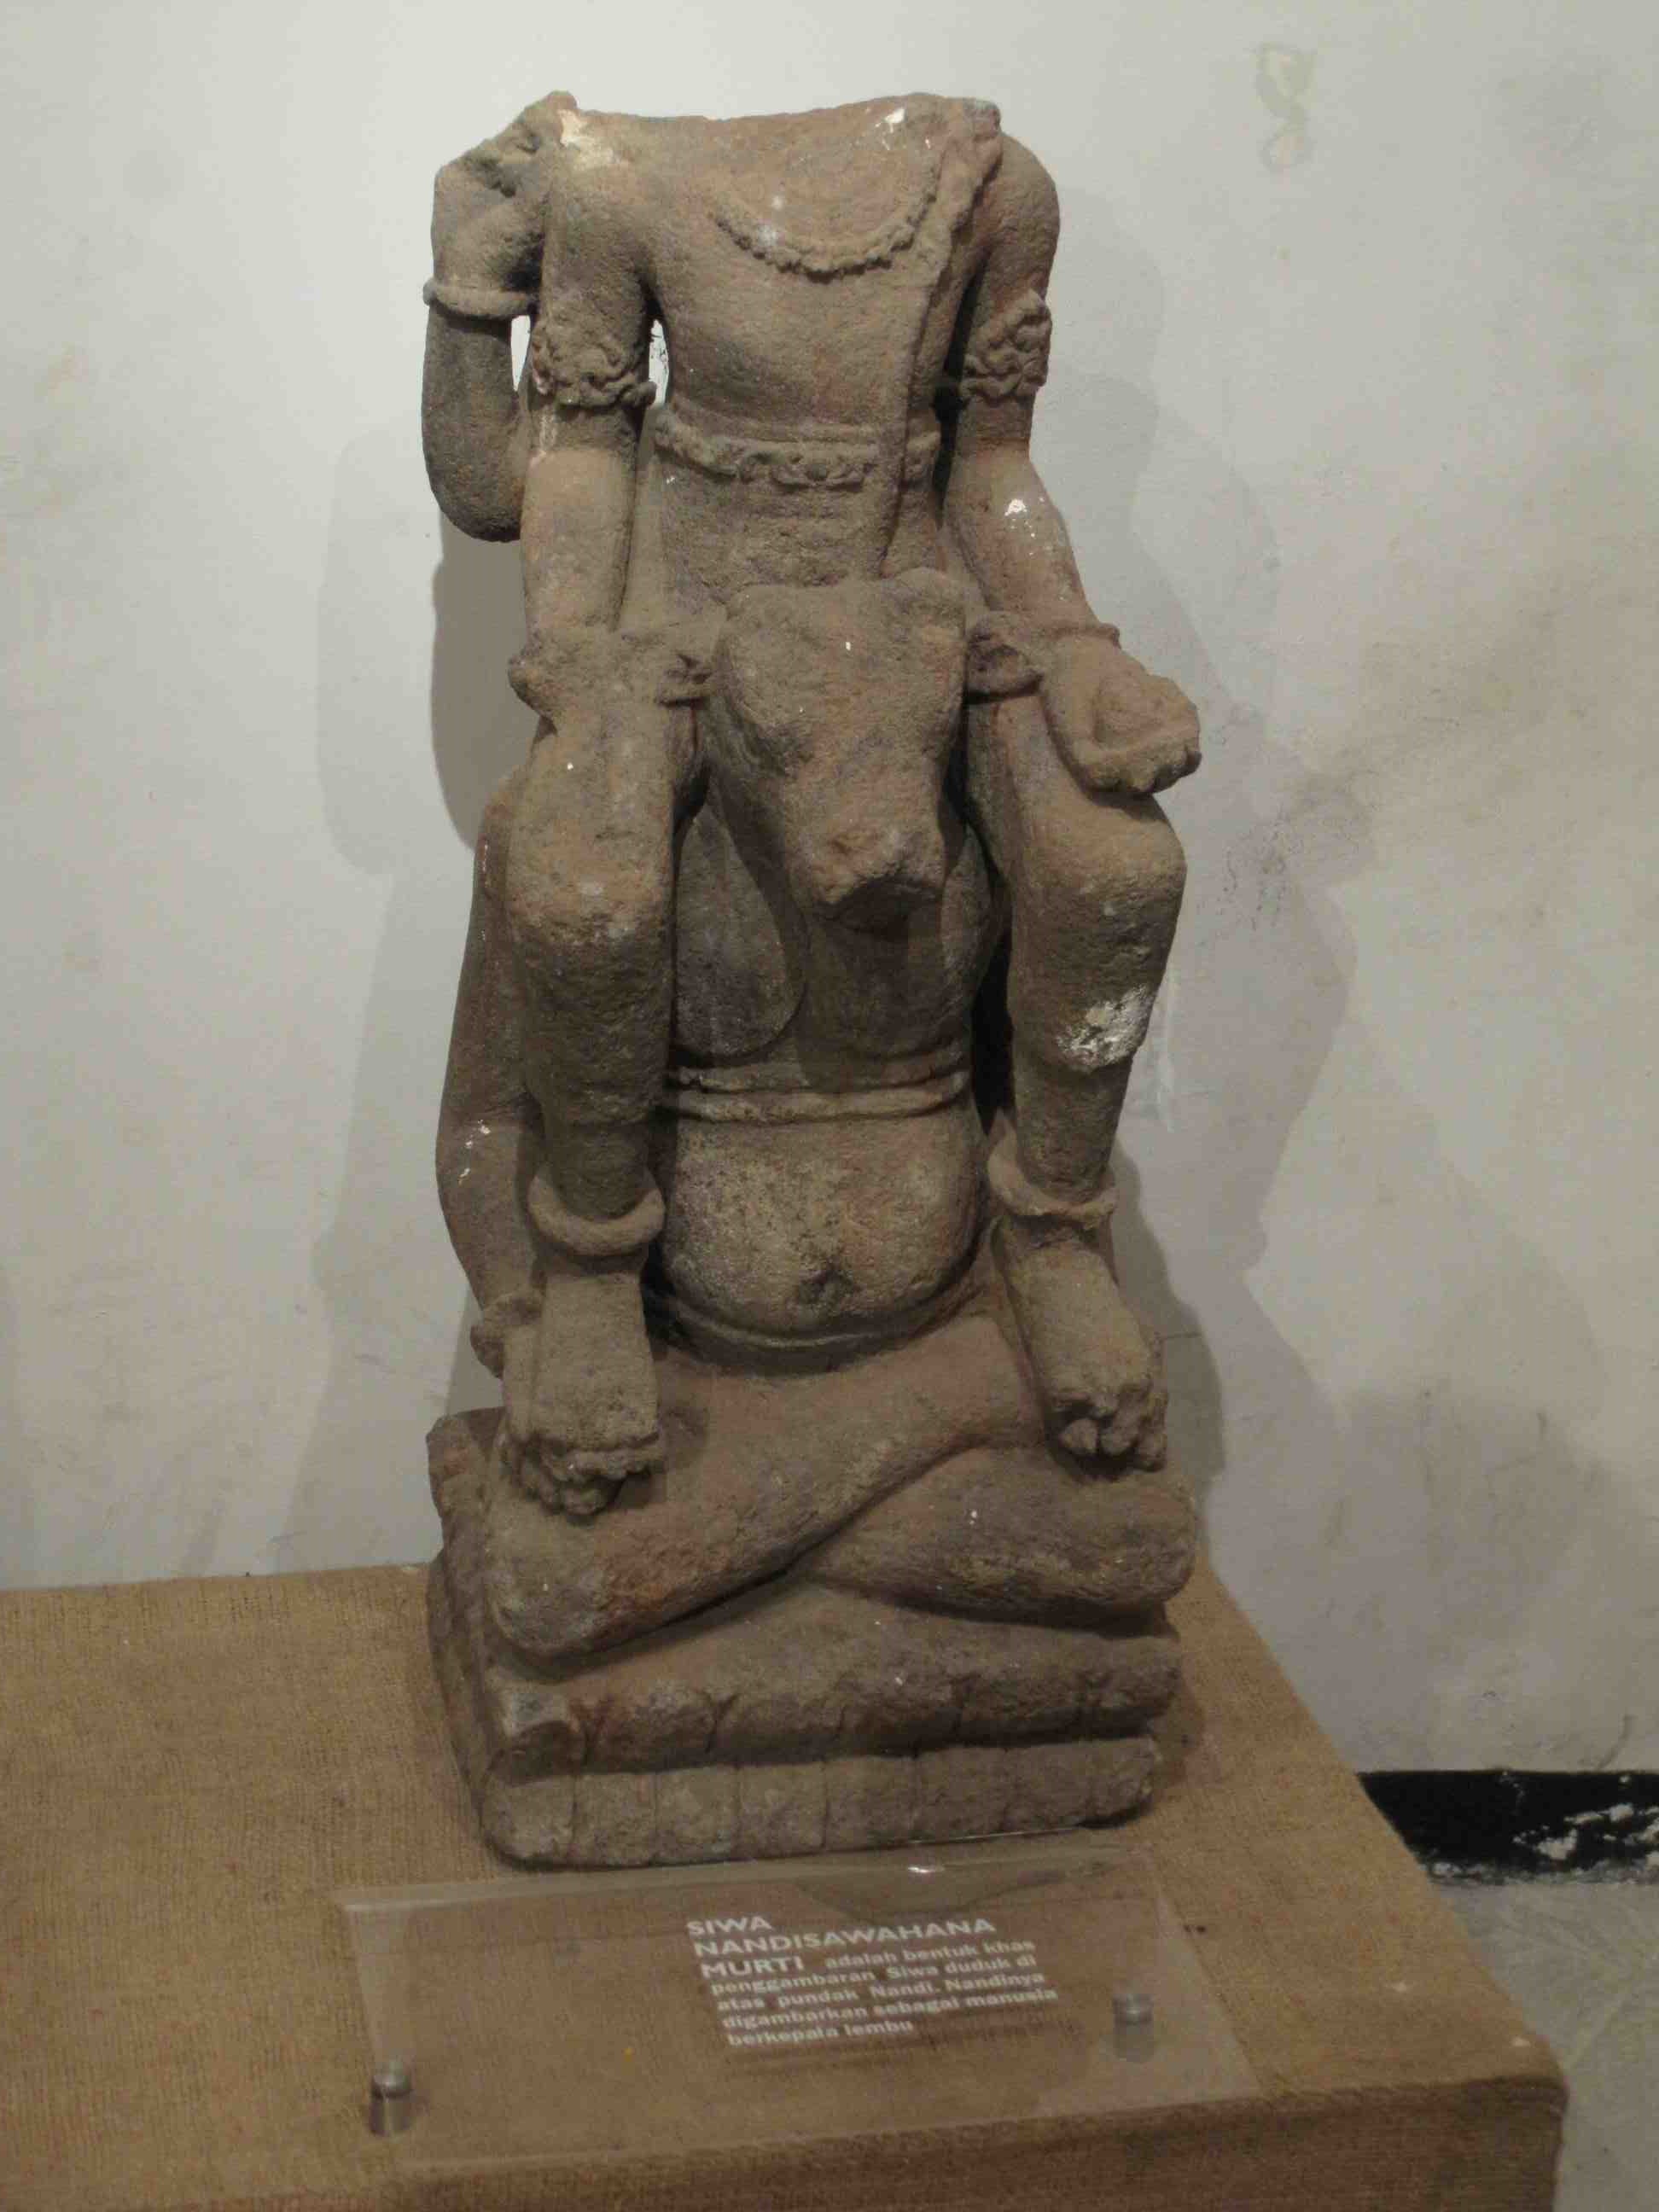 Left: Photo 05. Buddhist image at Selomerto (Candi Bogang) being conserved in 1982. Photo 06. Śiva on Nandi, Dieng Site Museum.